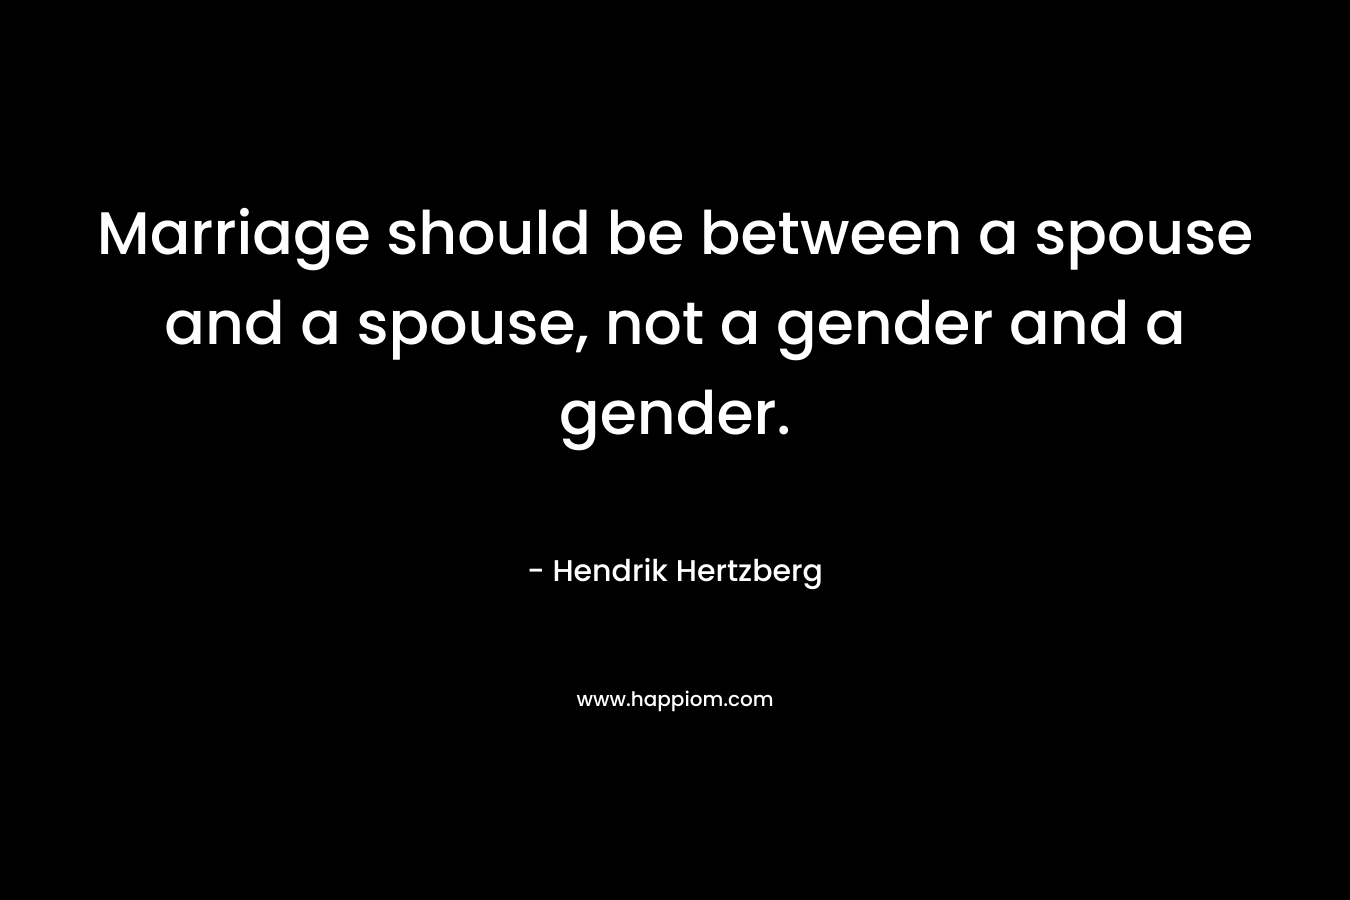 Marriage should be between a spouse and a spouse, not a gender and a gender.